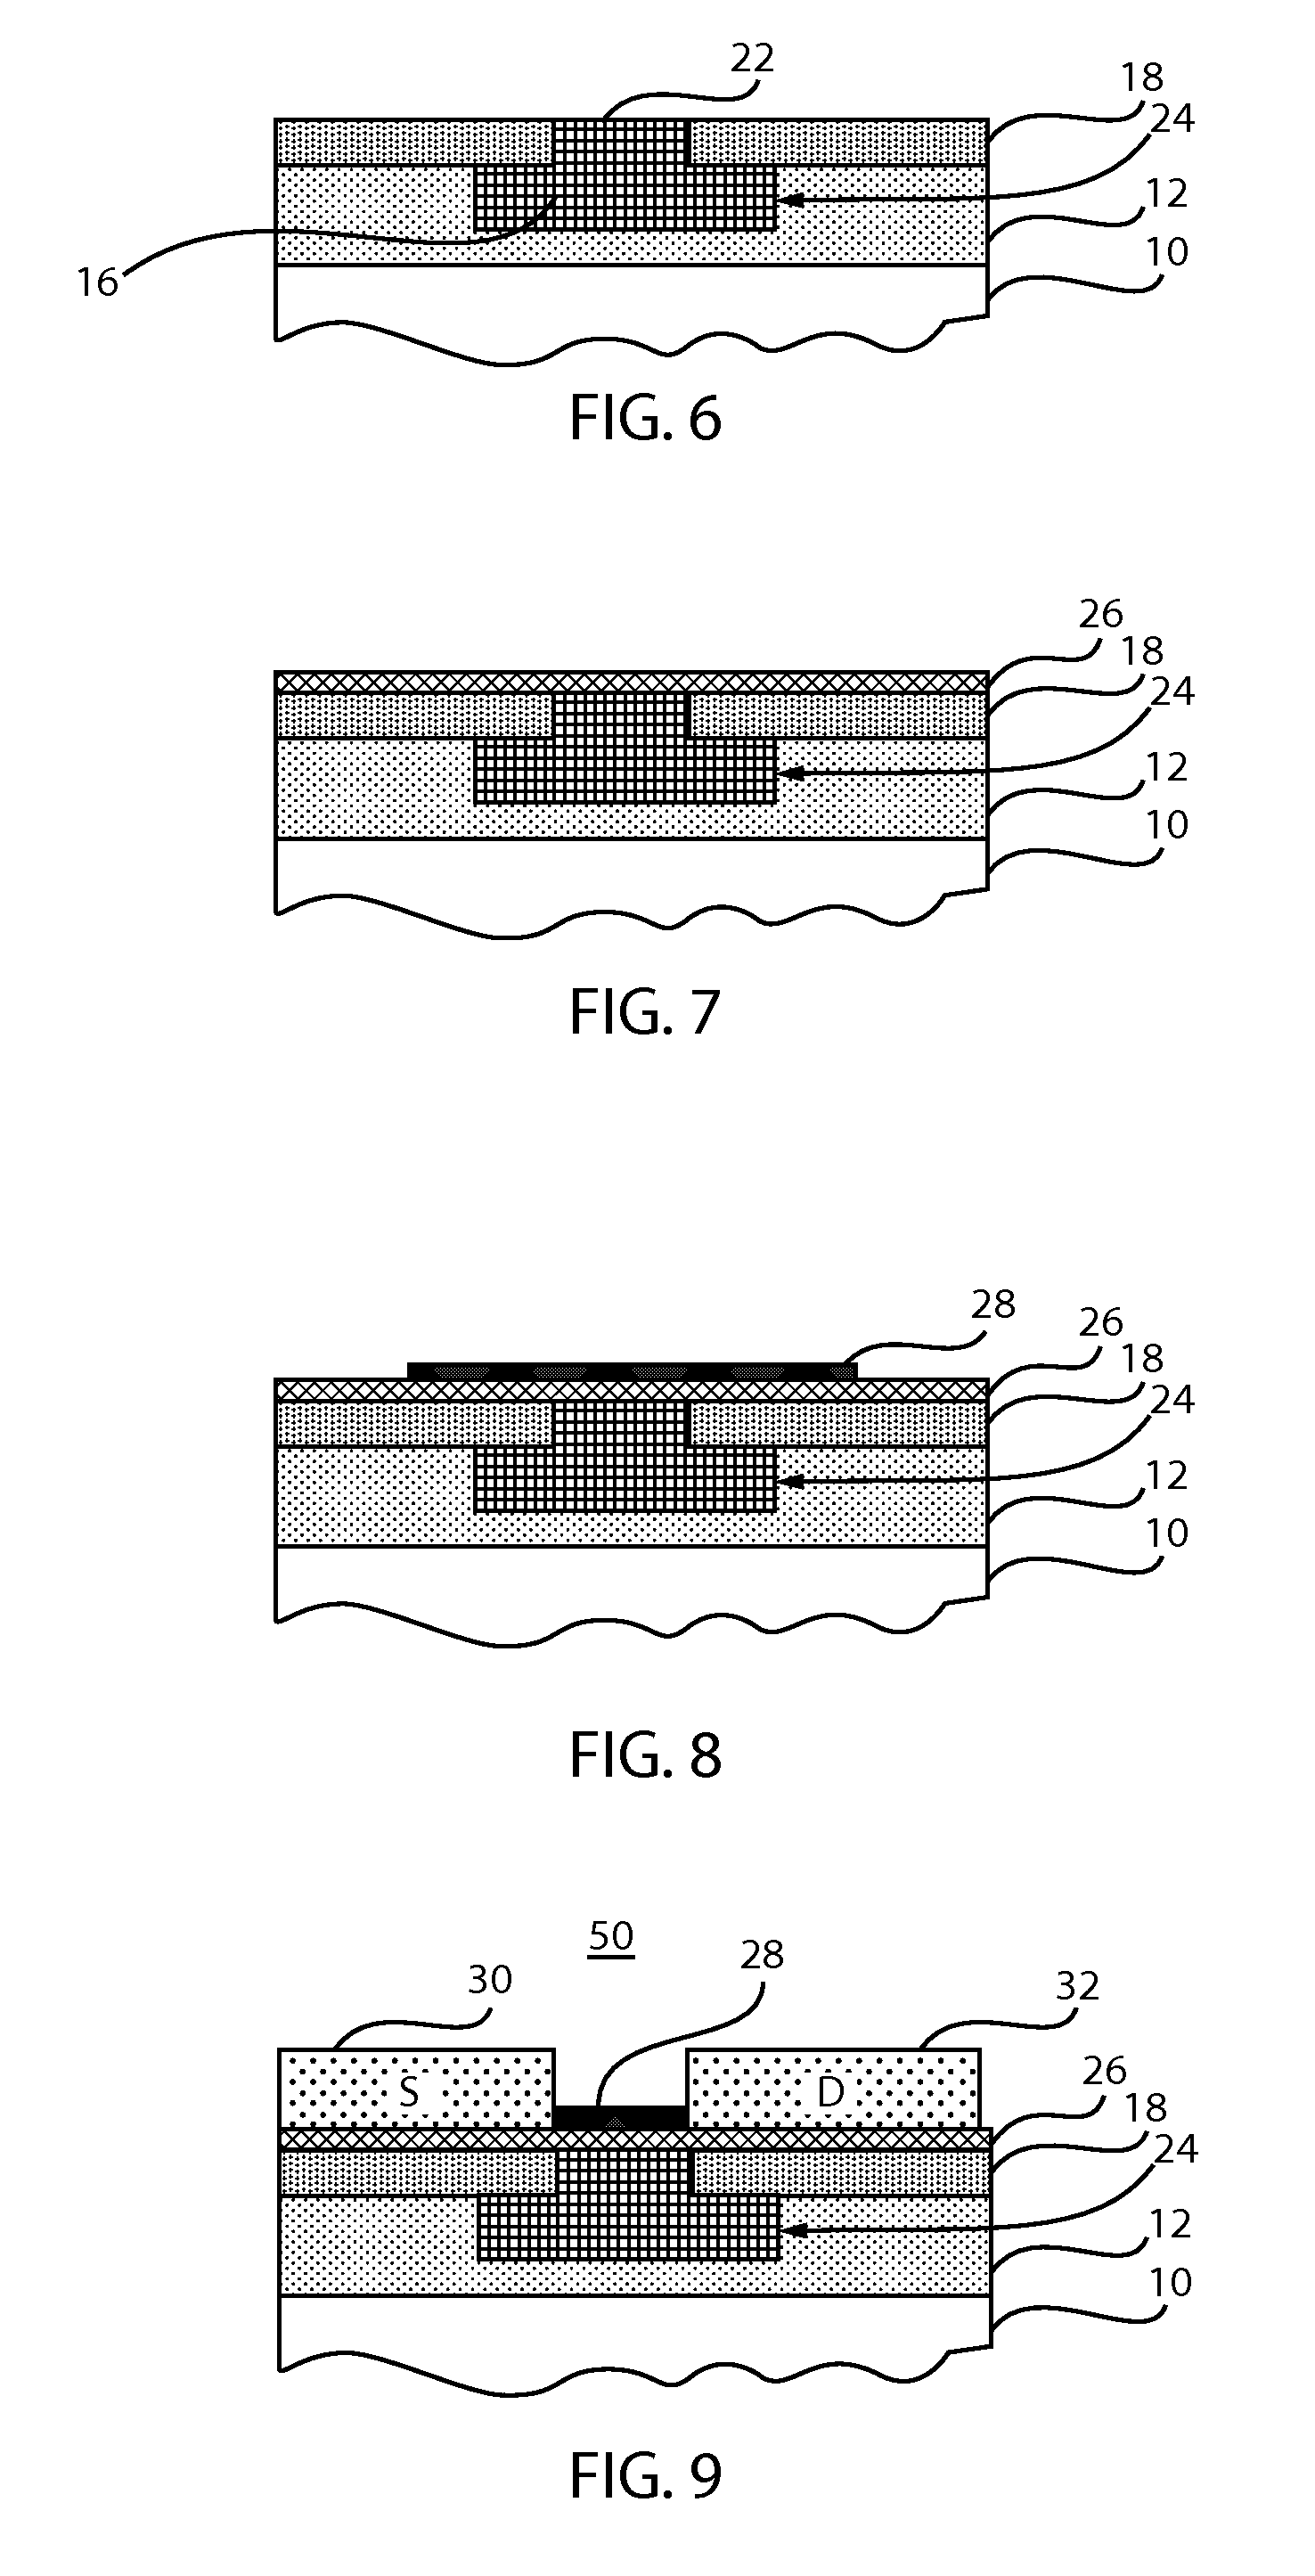 Transistor device with reduced gate resistance